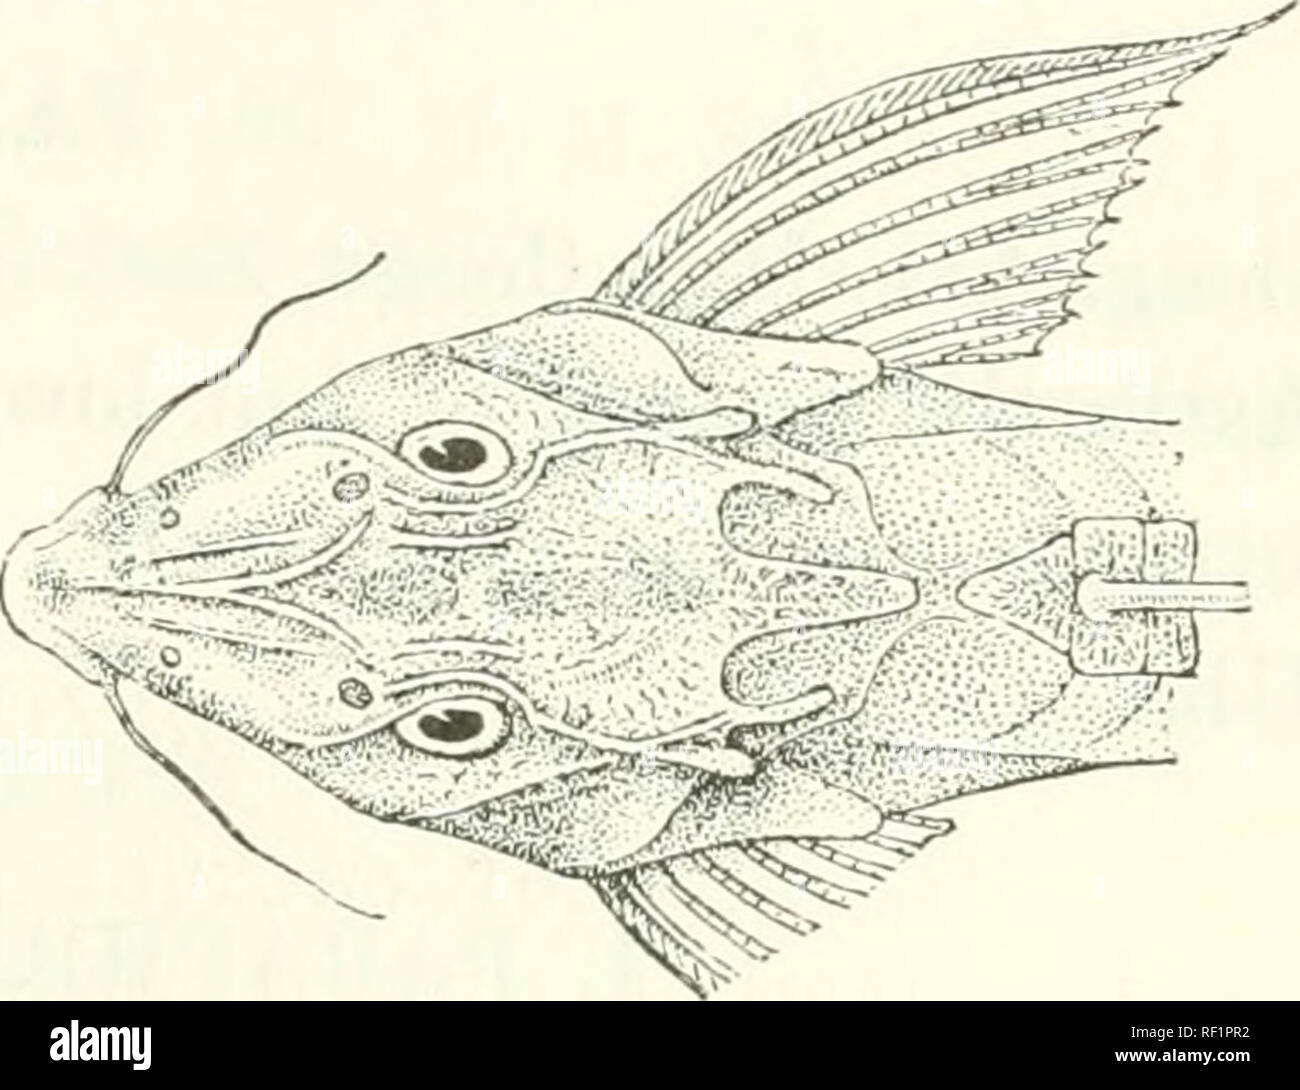 . Catalogue of the fresh-water fishes of Africa in the British Museum (Natural History). Fishes; Freshwater animals. Phractara (uisorgli. Type (P. Z. S. 1901). and 22 ventral scutes, the last 11 on caudal peduncle. Pale brownish above, speckled with blackish, white beneath; two small blackish spots on the dorsal fin and two blackish streaks along the caudal. Total length 46 millim. Lower Niger. 1. Type. Agberi. Dr. W. J. Ansorge (C). 7. PHRACTURA SCAPHIRHYNCIHURA. JJoumea scapliirliyncliura, Yaill. Rev. Scieutif. xxiii. ii. Ib8r&gt;, }&gt;. 18. Feltura scaphirht/nchura, Pellegr. Bull. Mus. Par Stock Photo